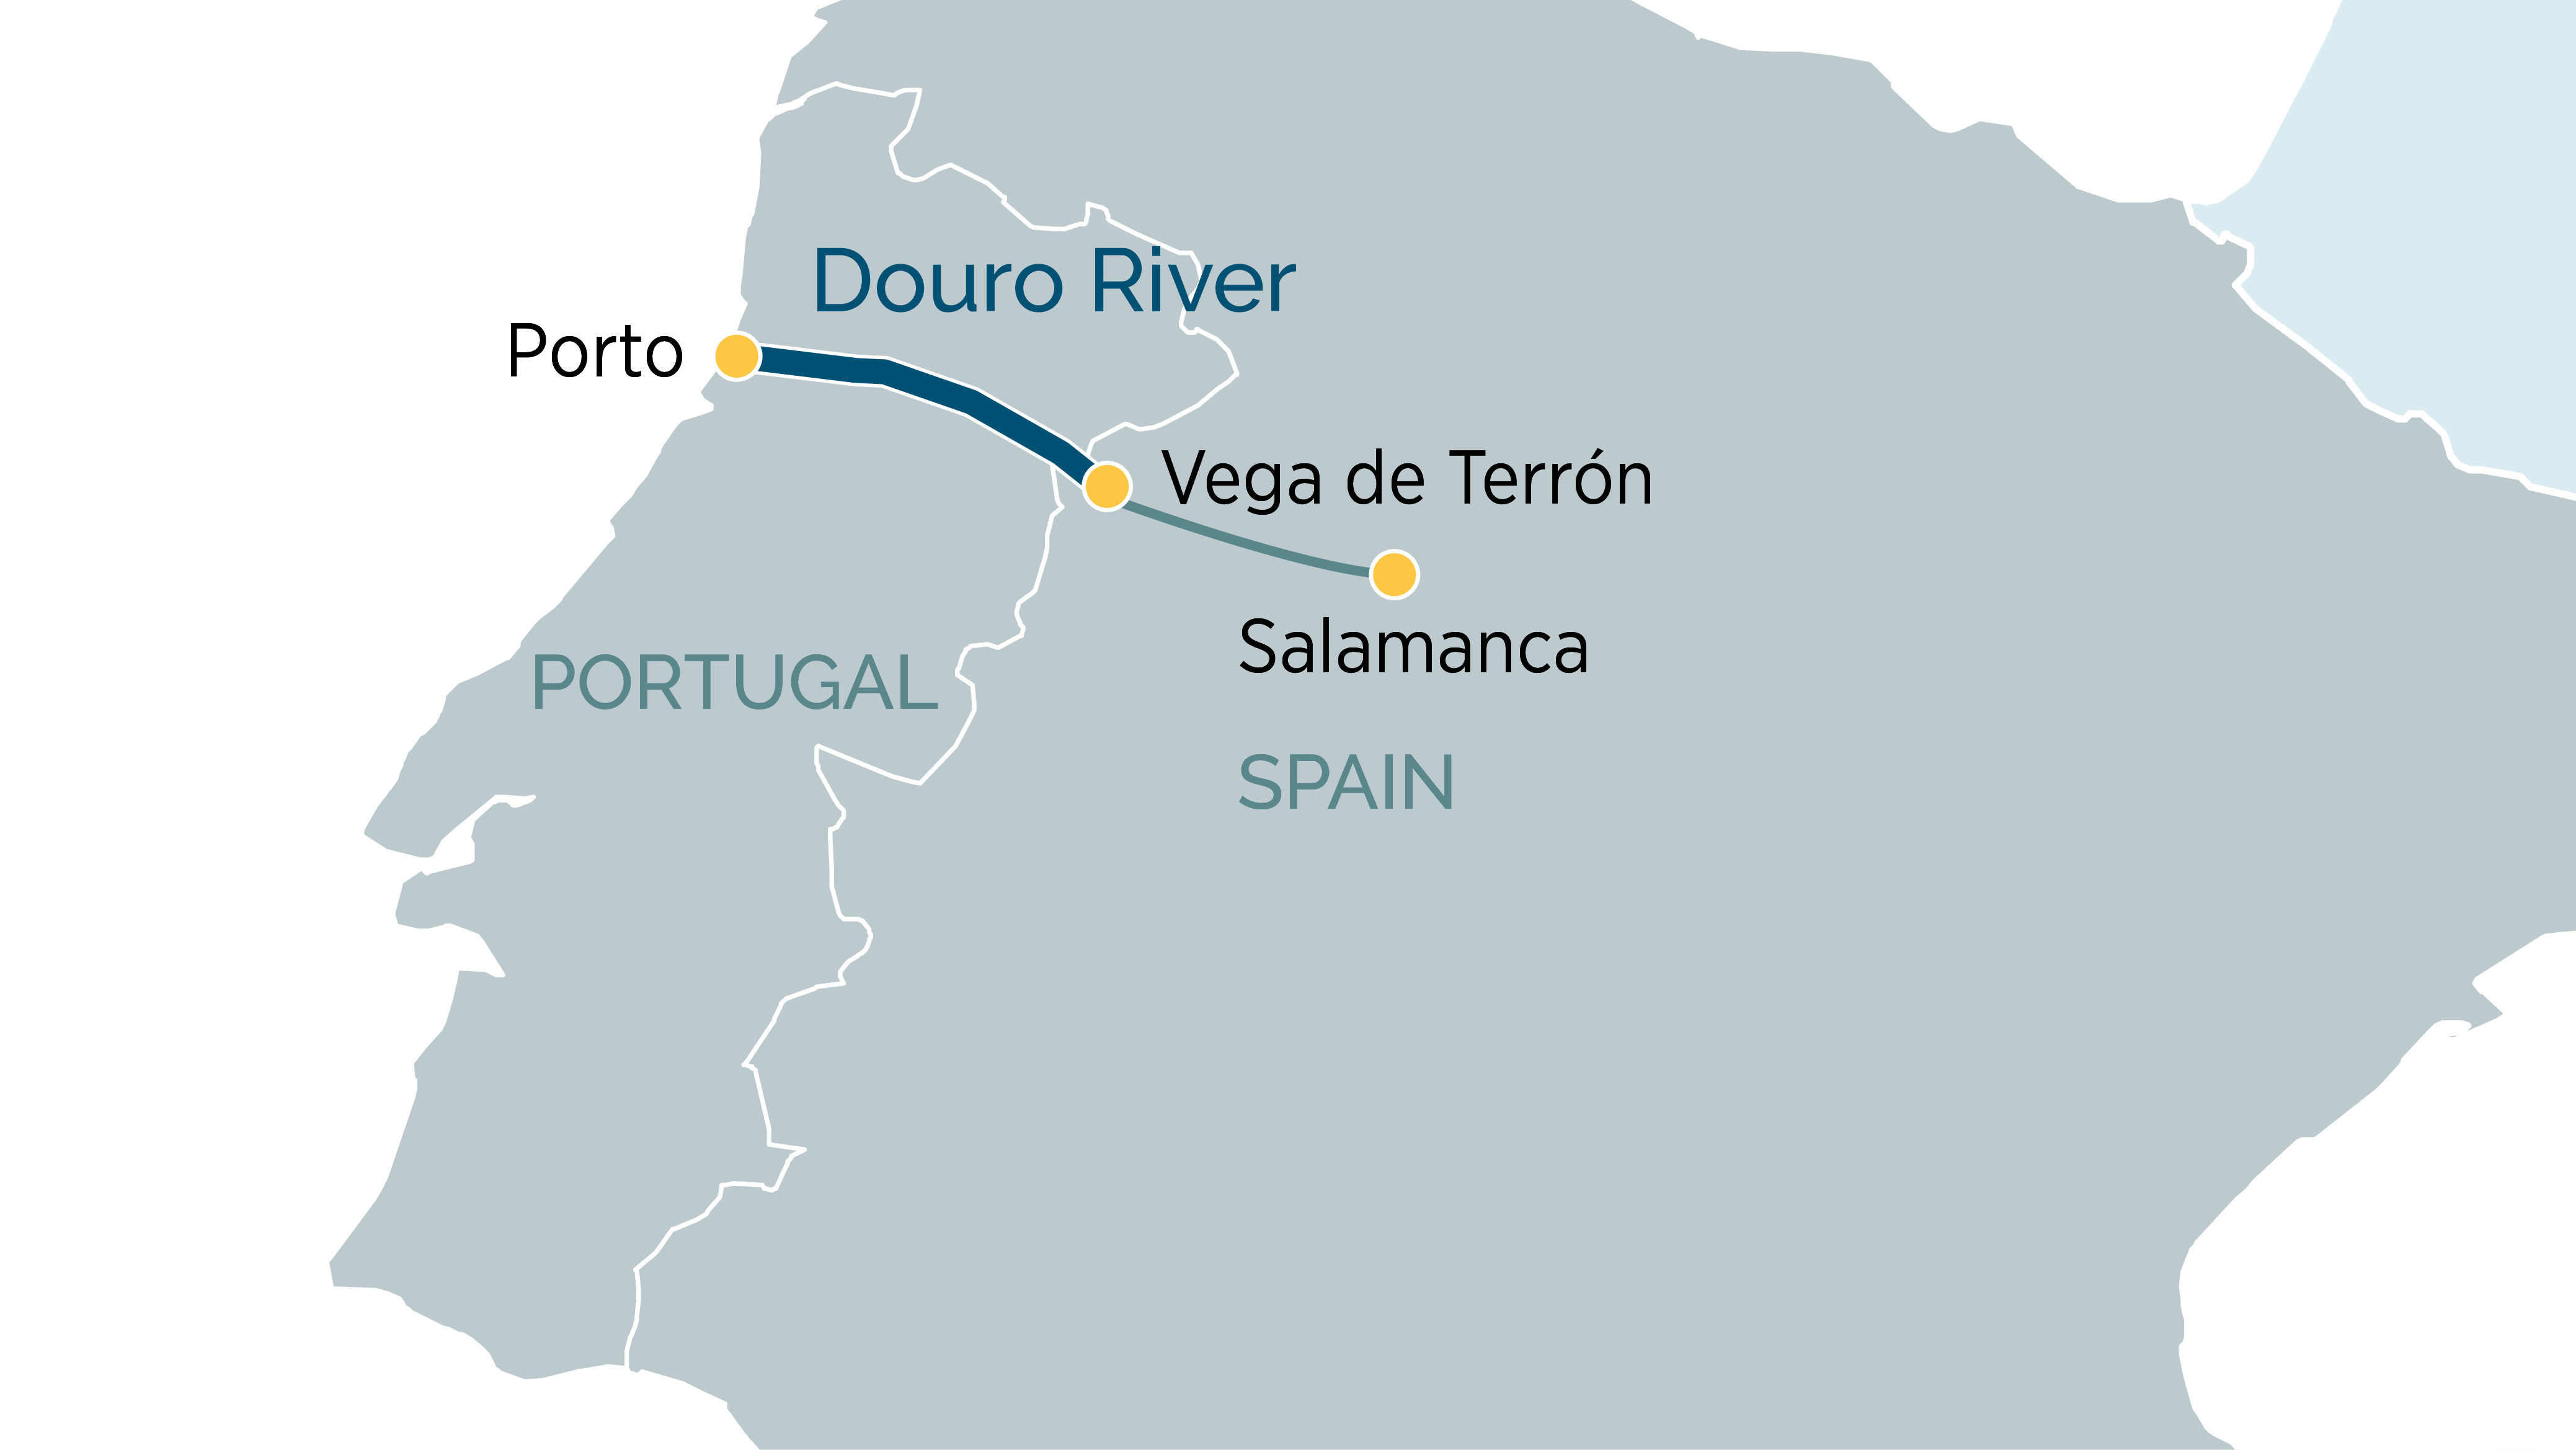 Map of Portugal and Spain showing the Douro River